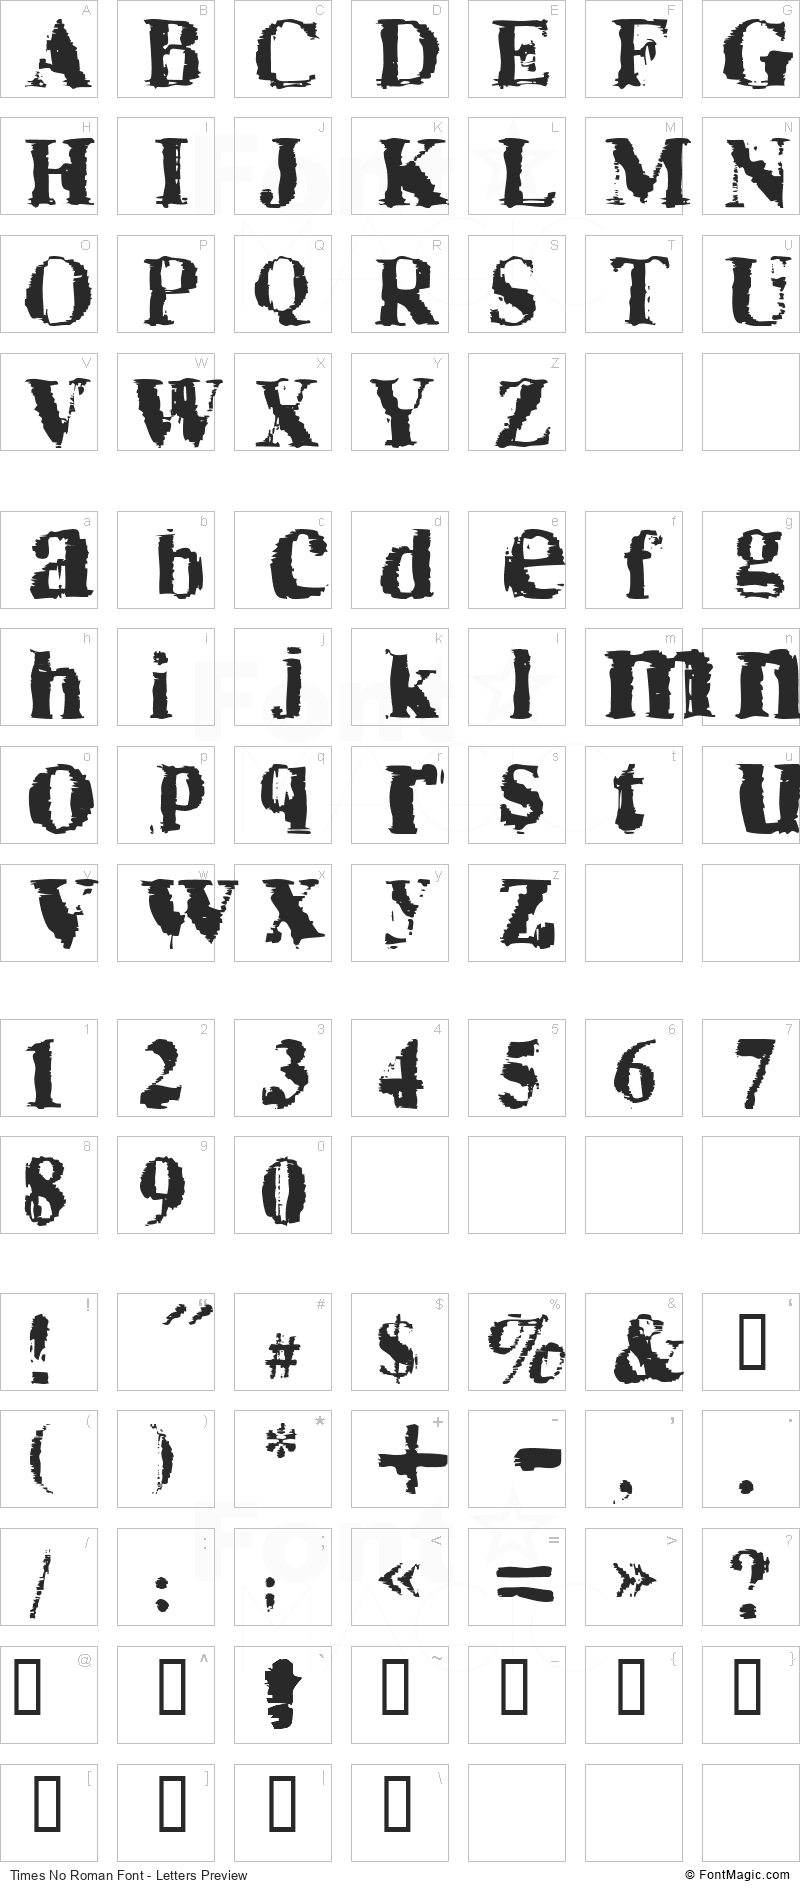 Times No Roman Font - All Latters Preview Chart